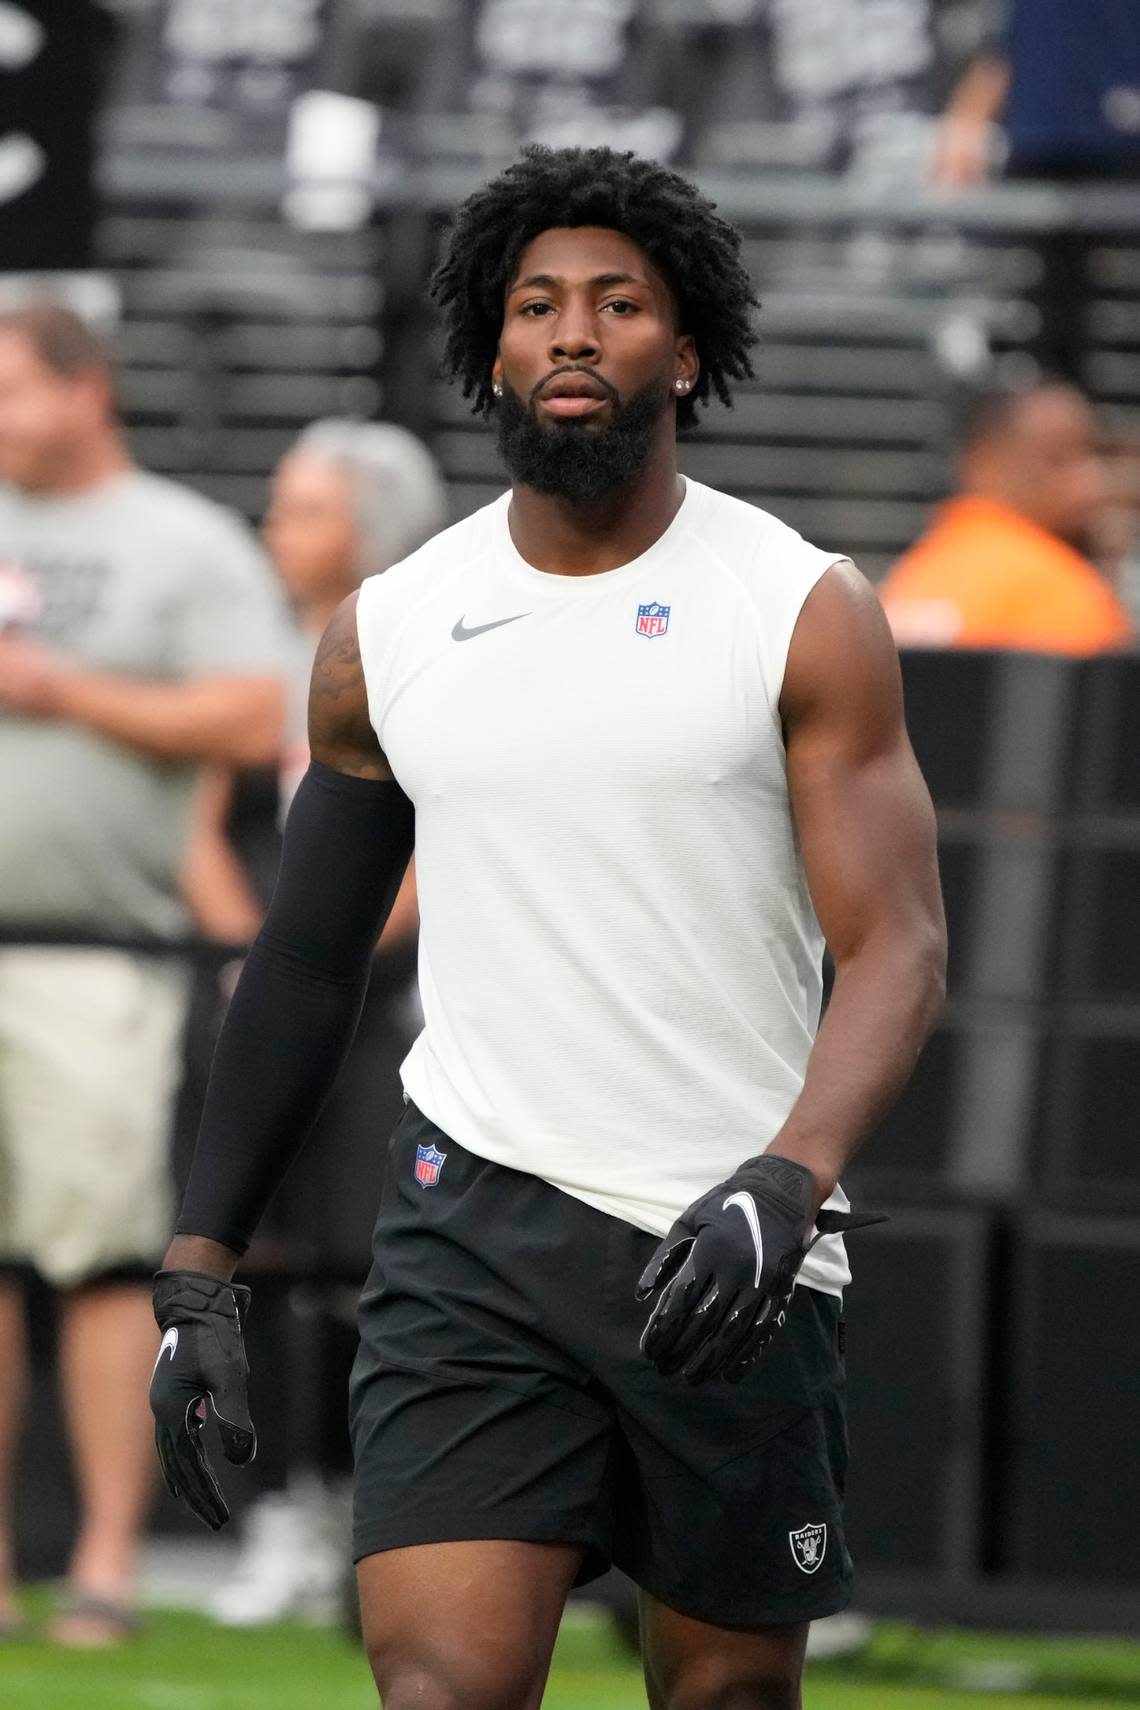 Raiders cornerback Nate Hobbs warms up before an NFL preseason football game against the New England Patriots, Friday, Aug. 26, 2022, in Las Vegas.